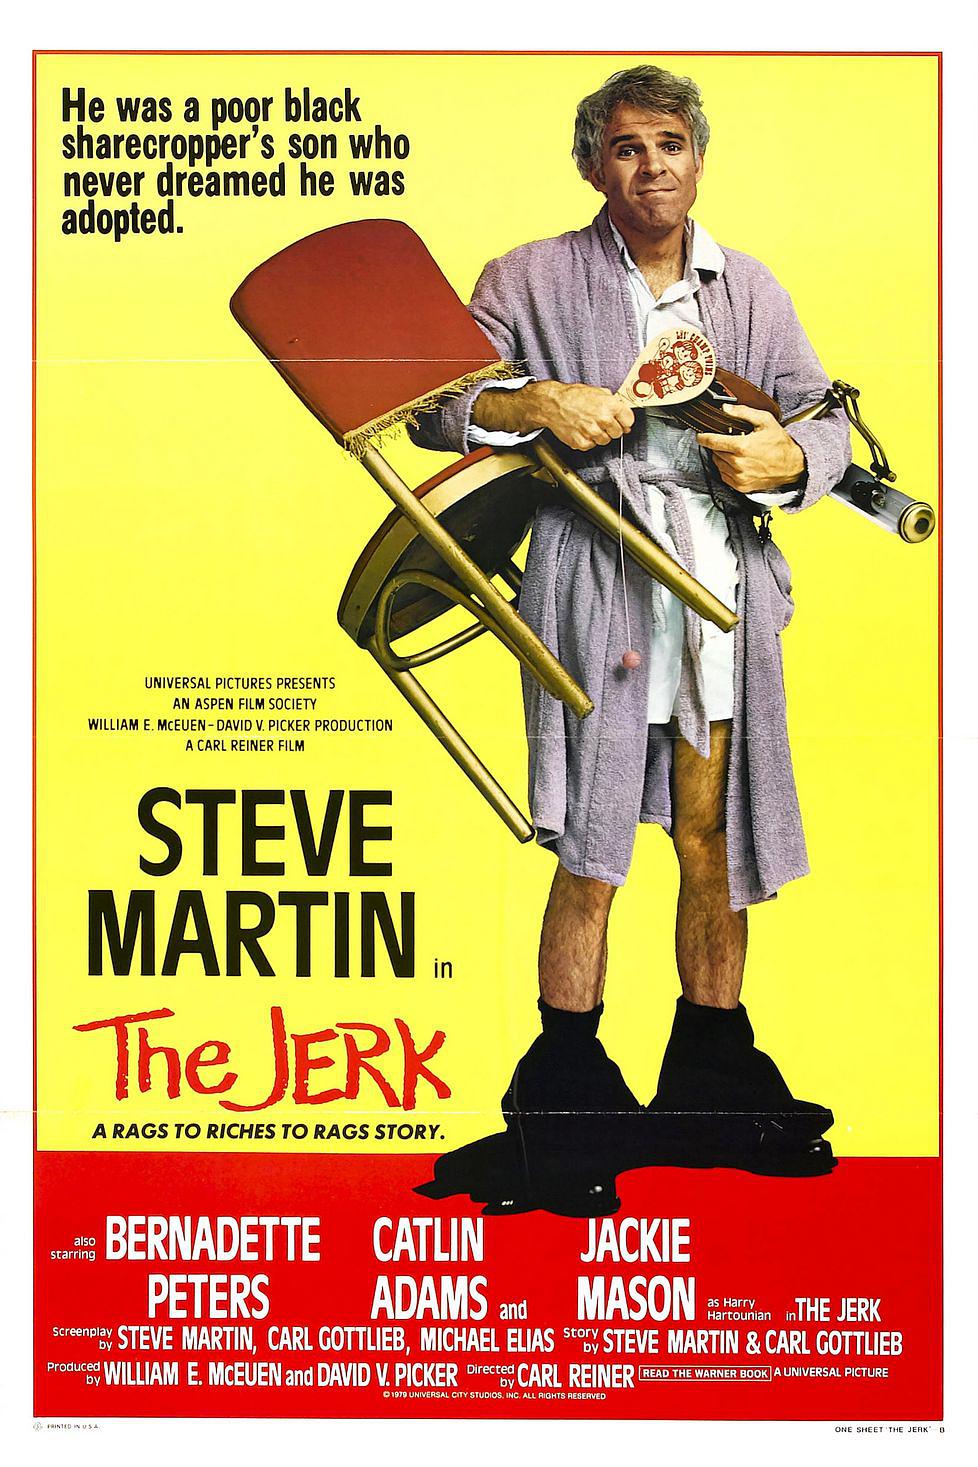 󱿵 The.Jerk.1979.REMASTERED.1080p.BluRay.x264-AMIABLE 9.85GB-1.png